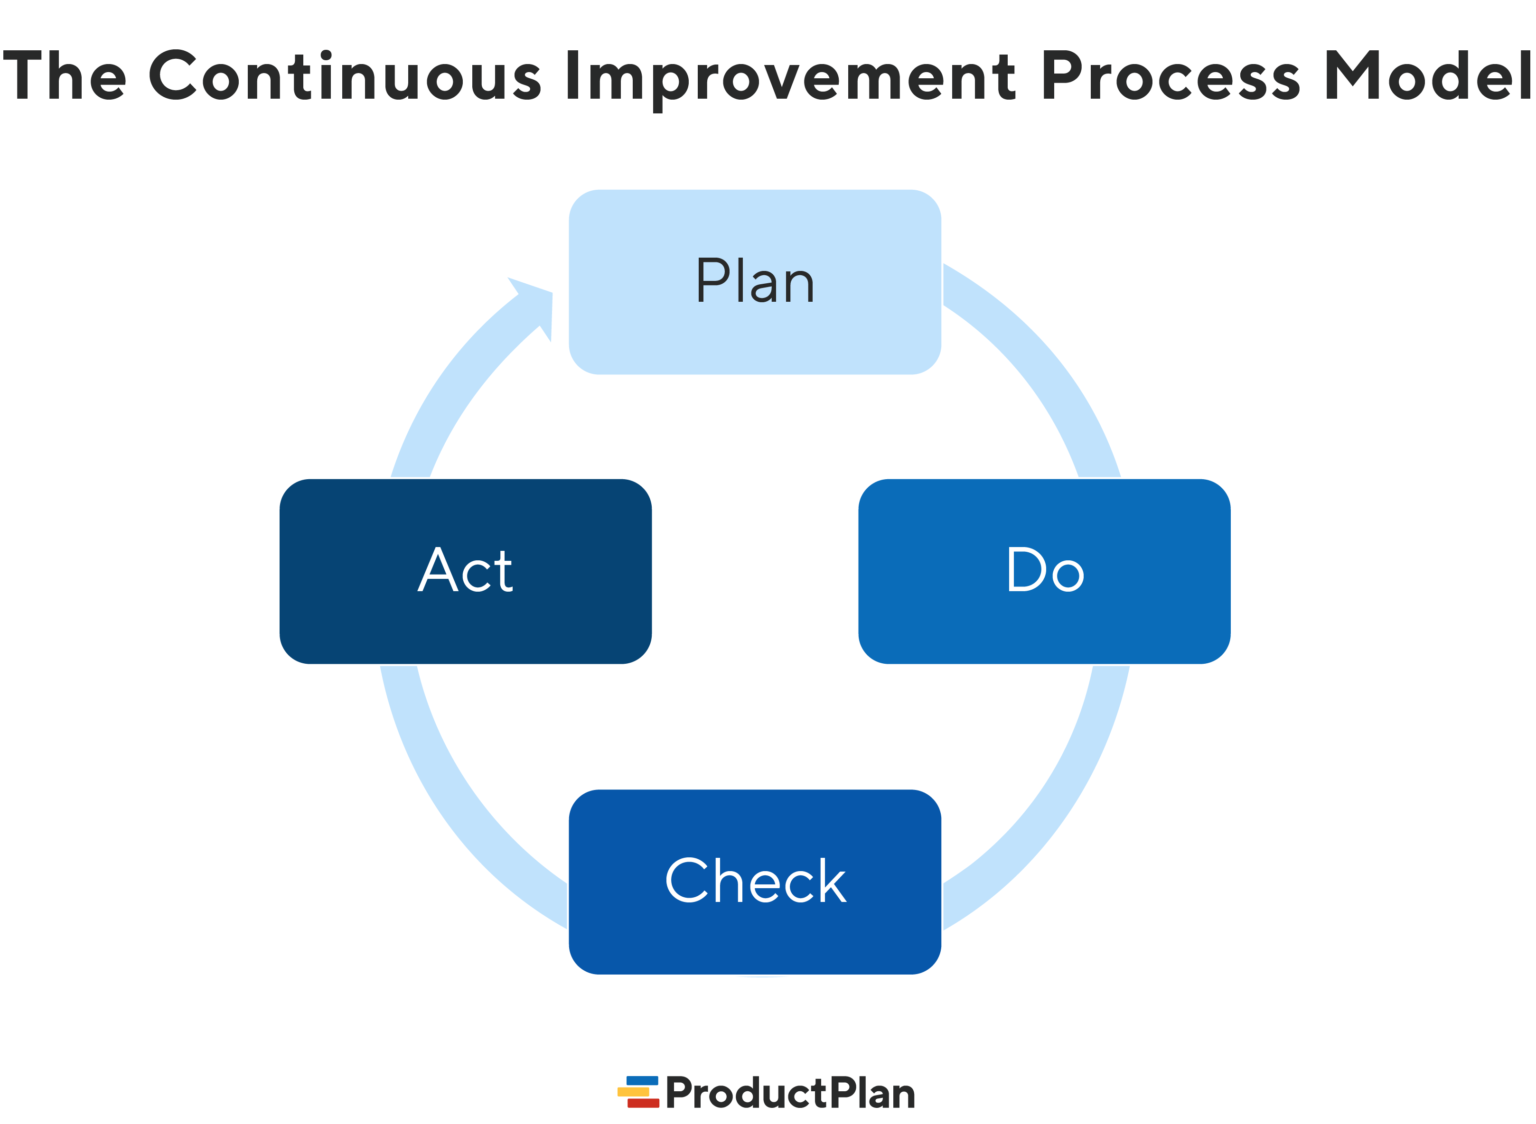 The Term Used to Describe the Continuous Improvement of Processes